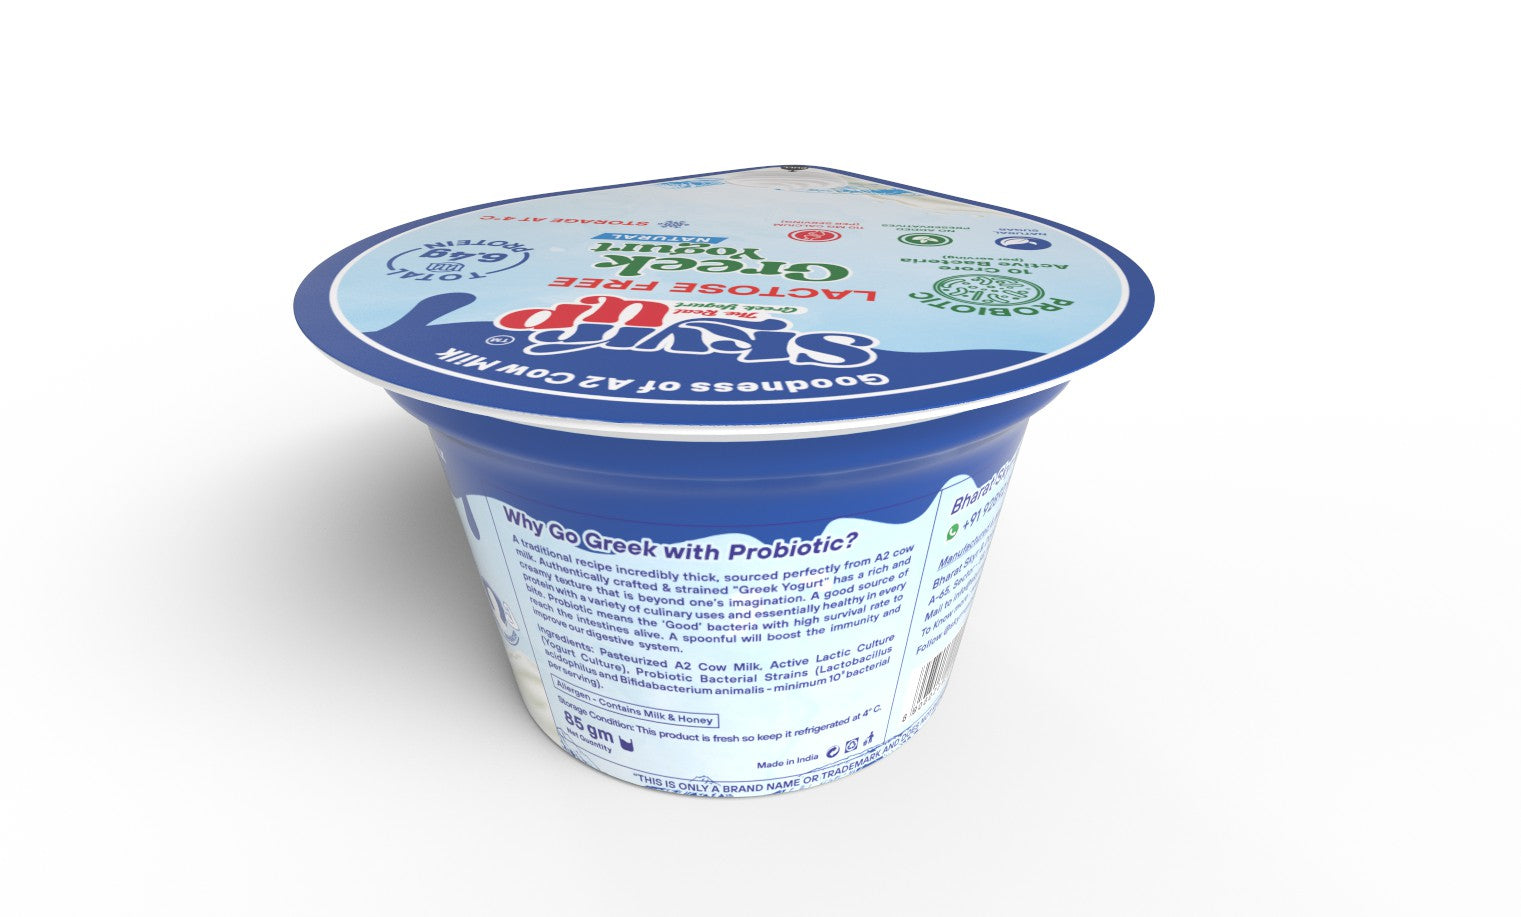 Greek Yogurt - 85gm - Natural (Made From A2 Cow Milk) - Probiotic, 6.4gm Protein, Zero Preservatives, Lactose Free